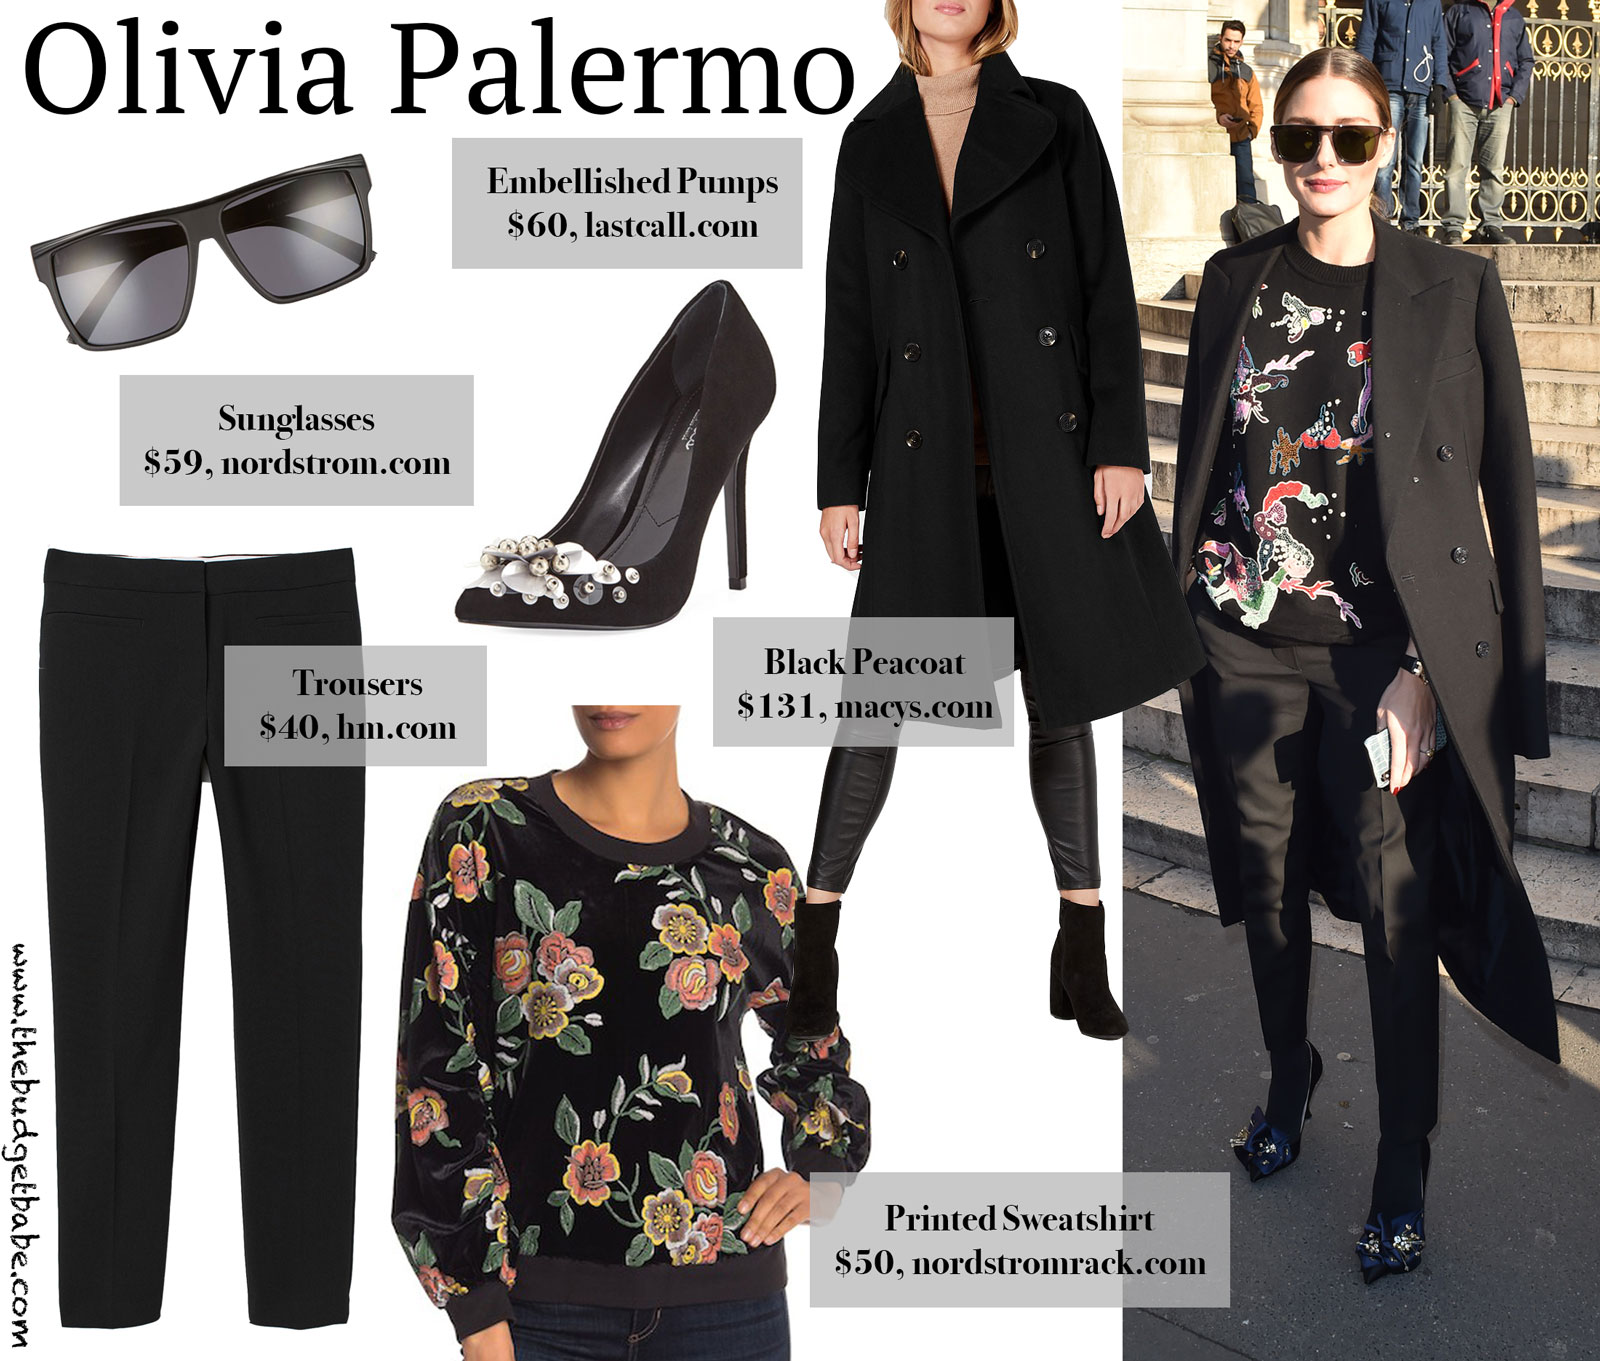 Olivia Palermo Printed Sweatshirt and Peacoat Look for Less